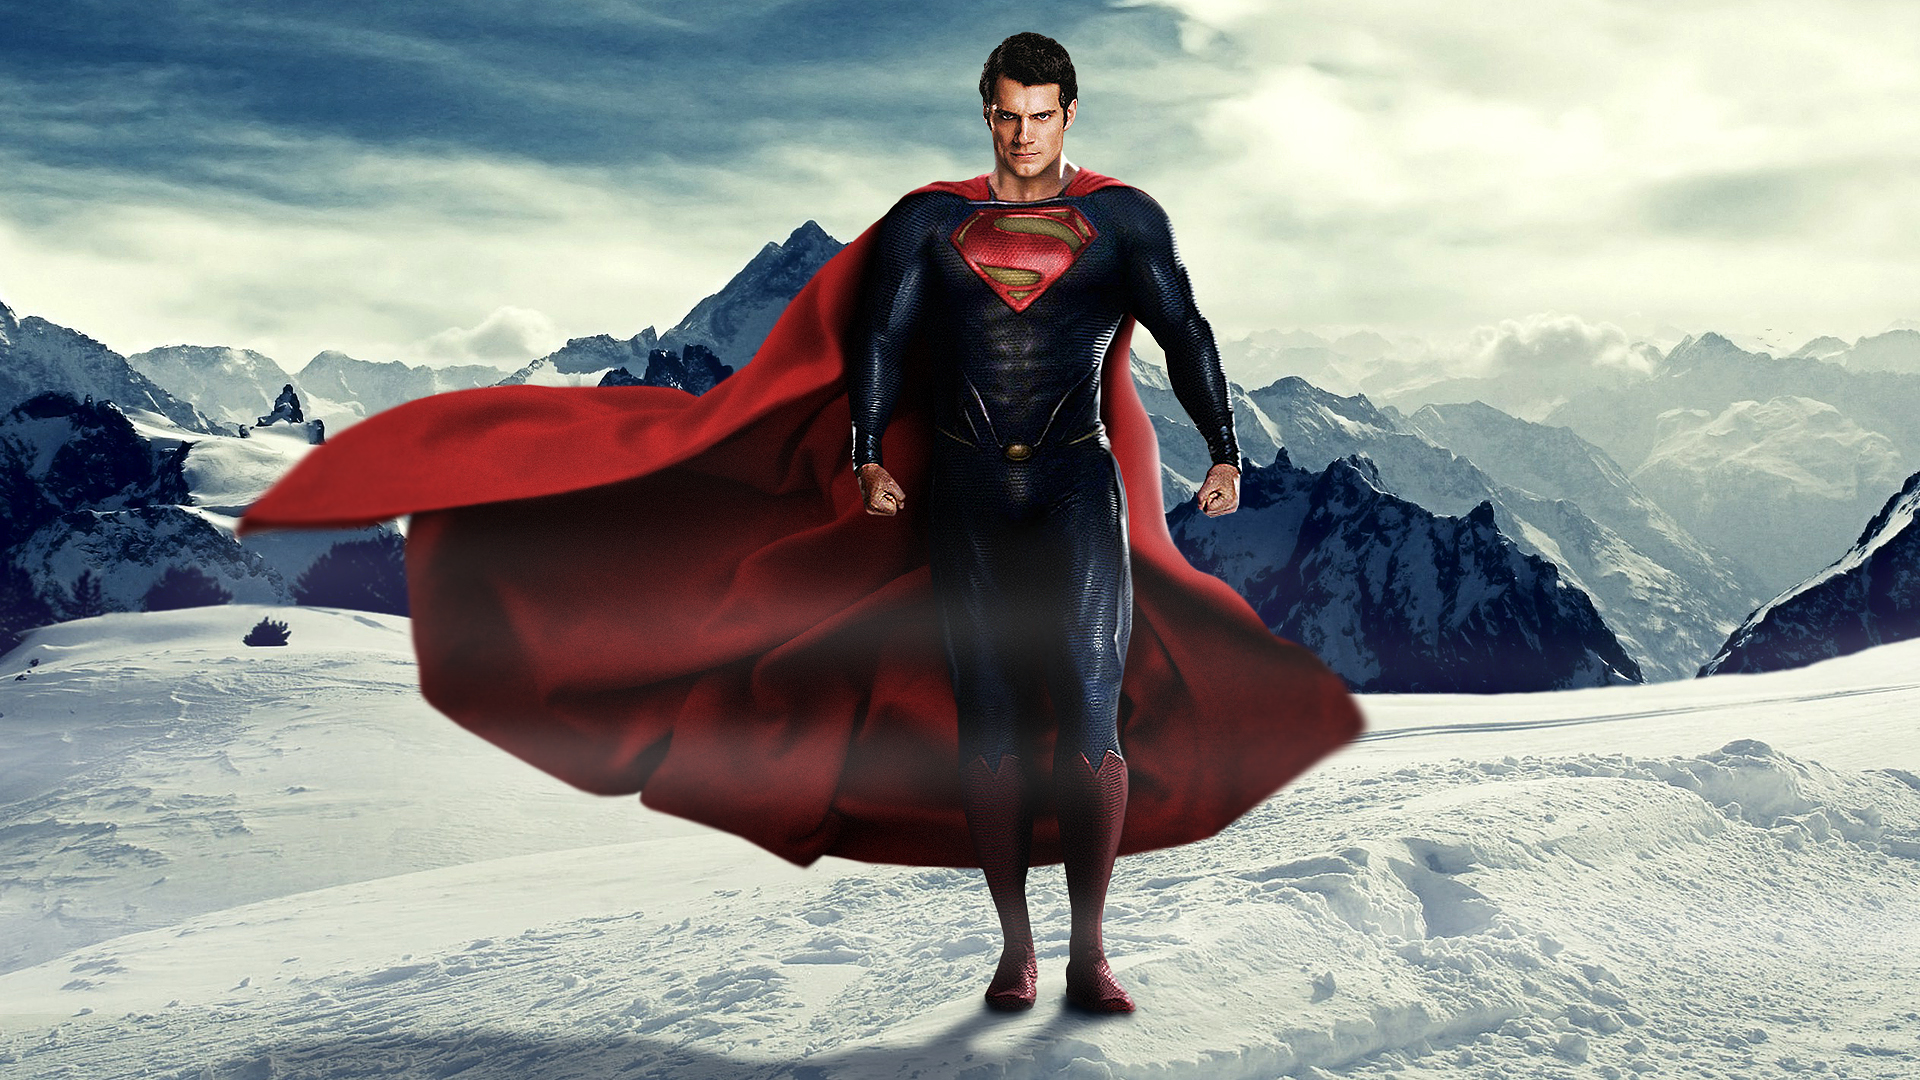 Superman Wallpaper Background HD download free NEW